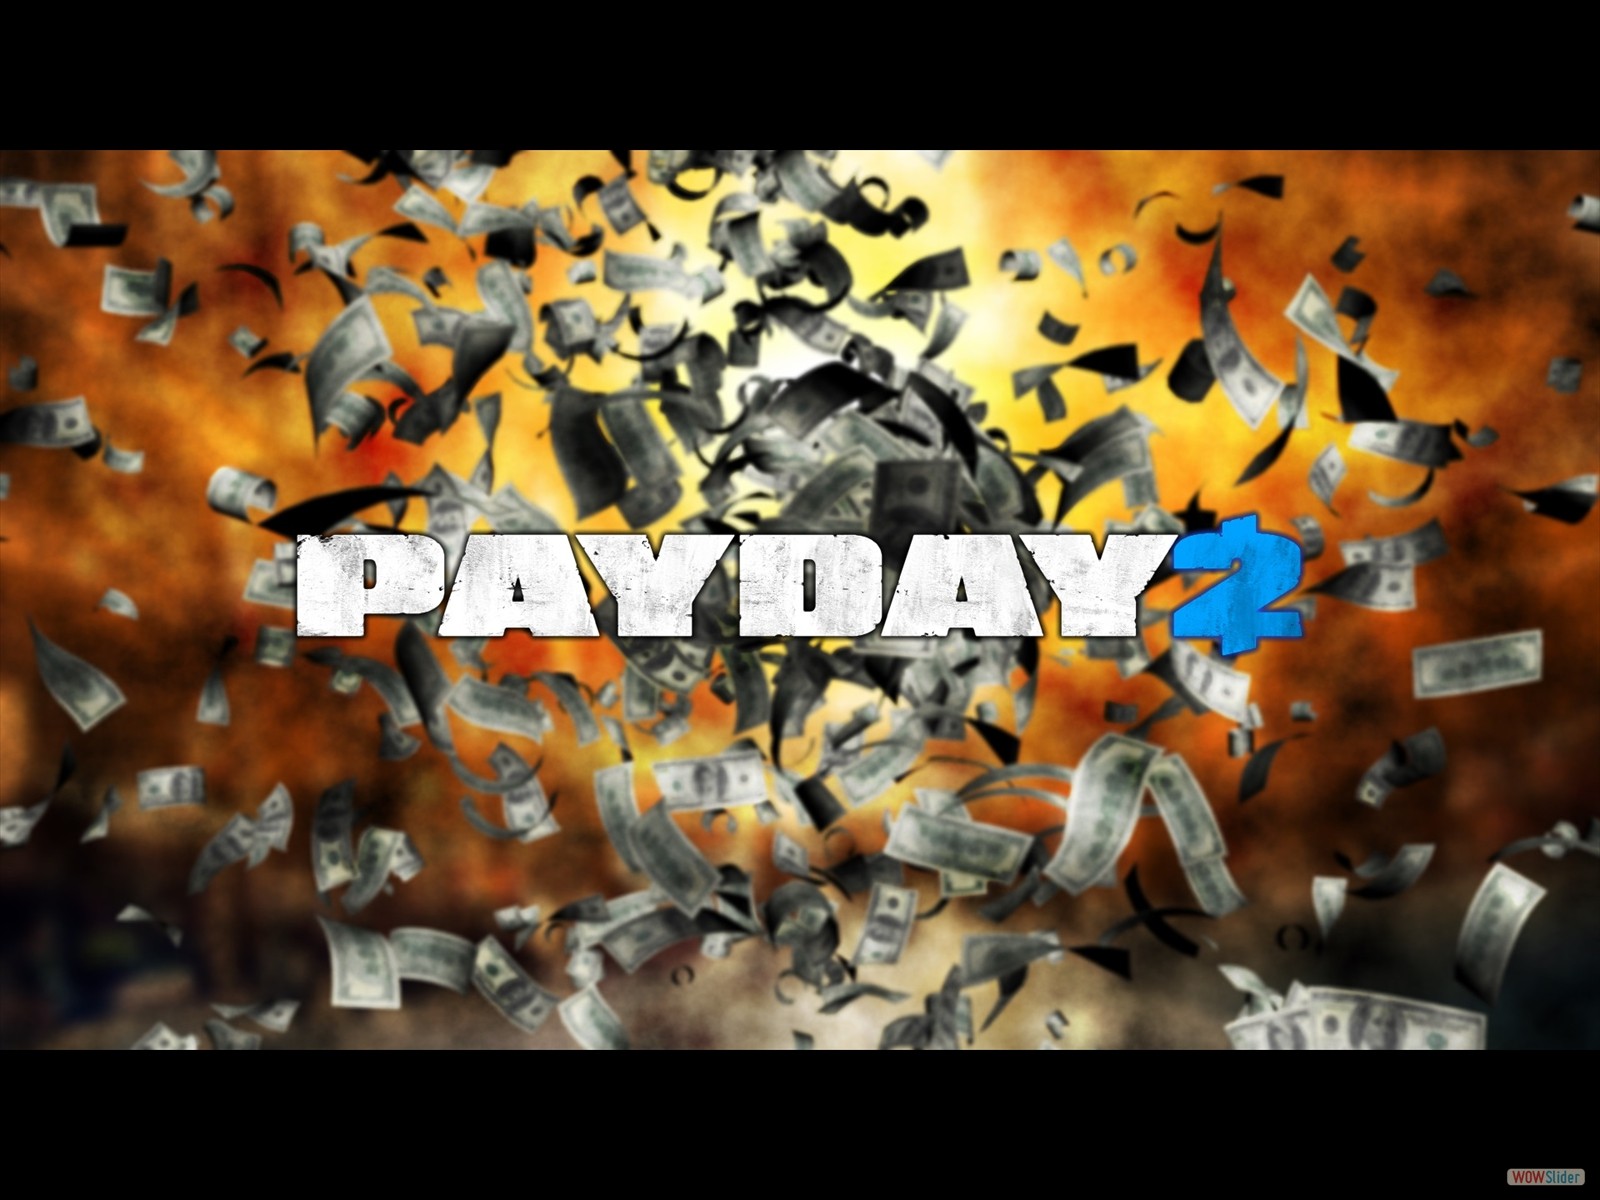 Steam must be running to play this game payday 2 фото 7